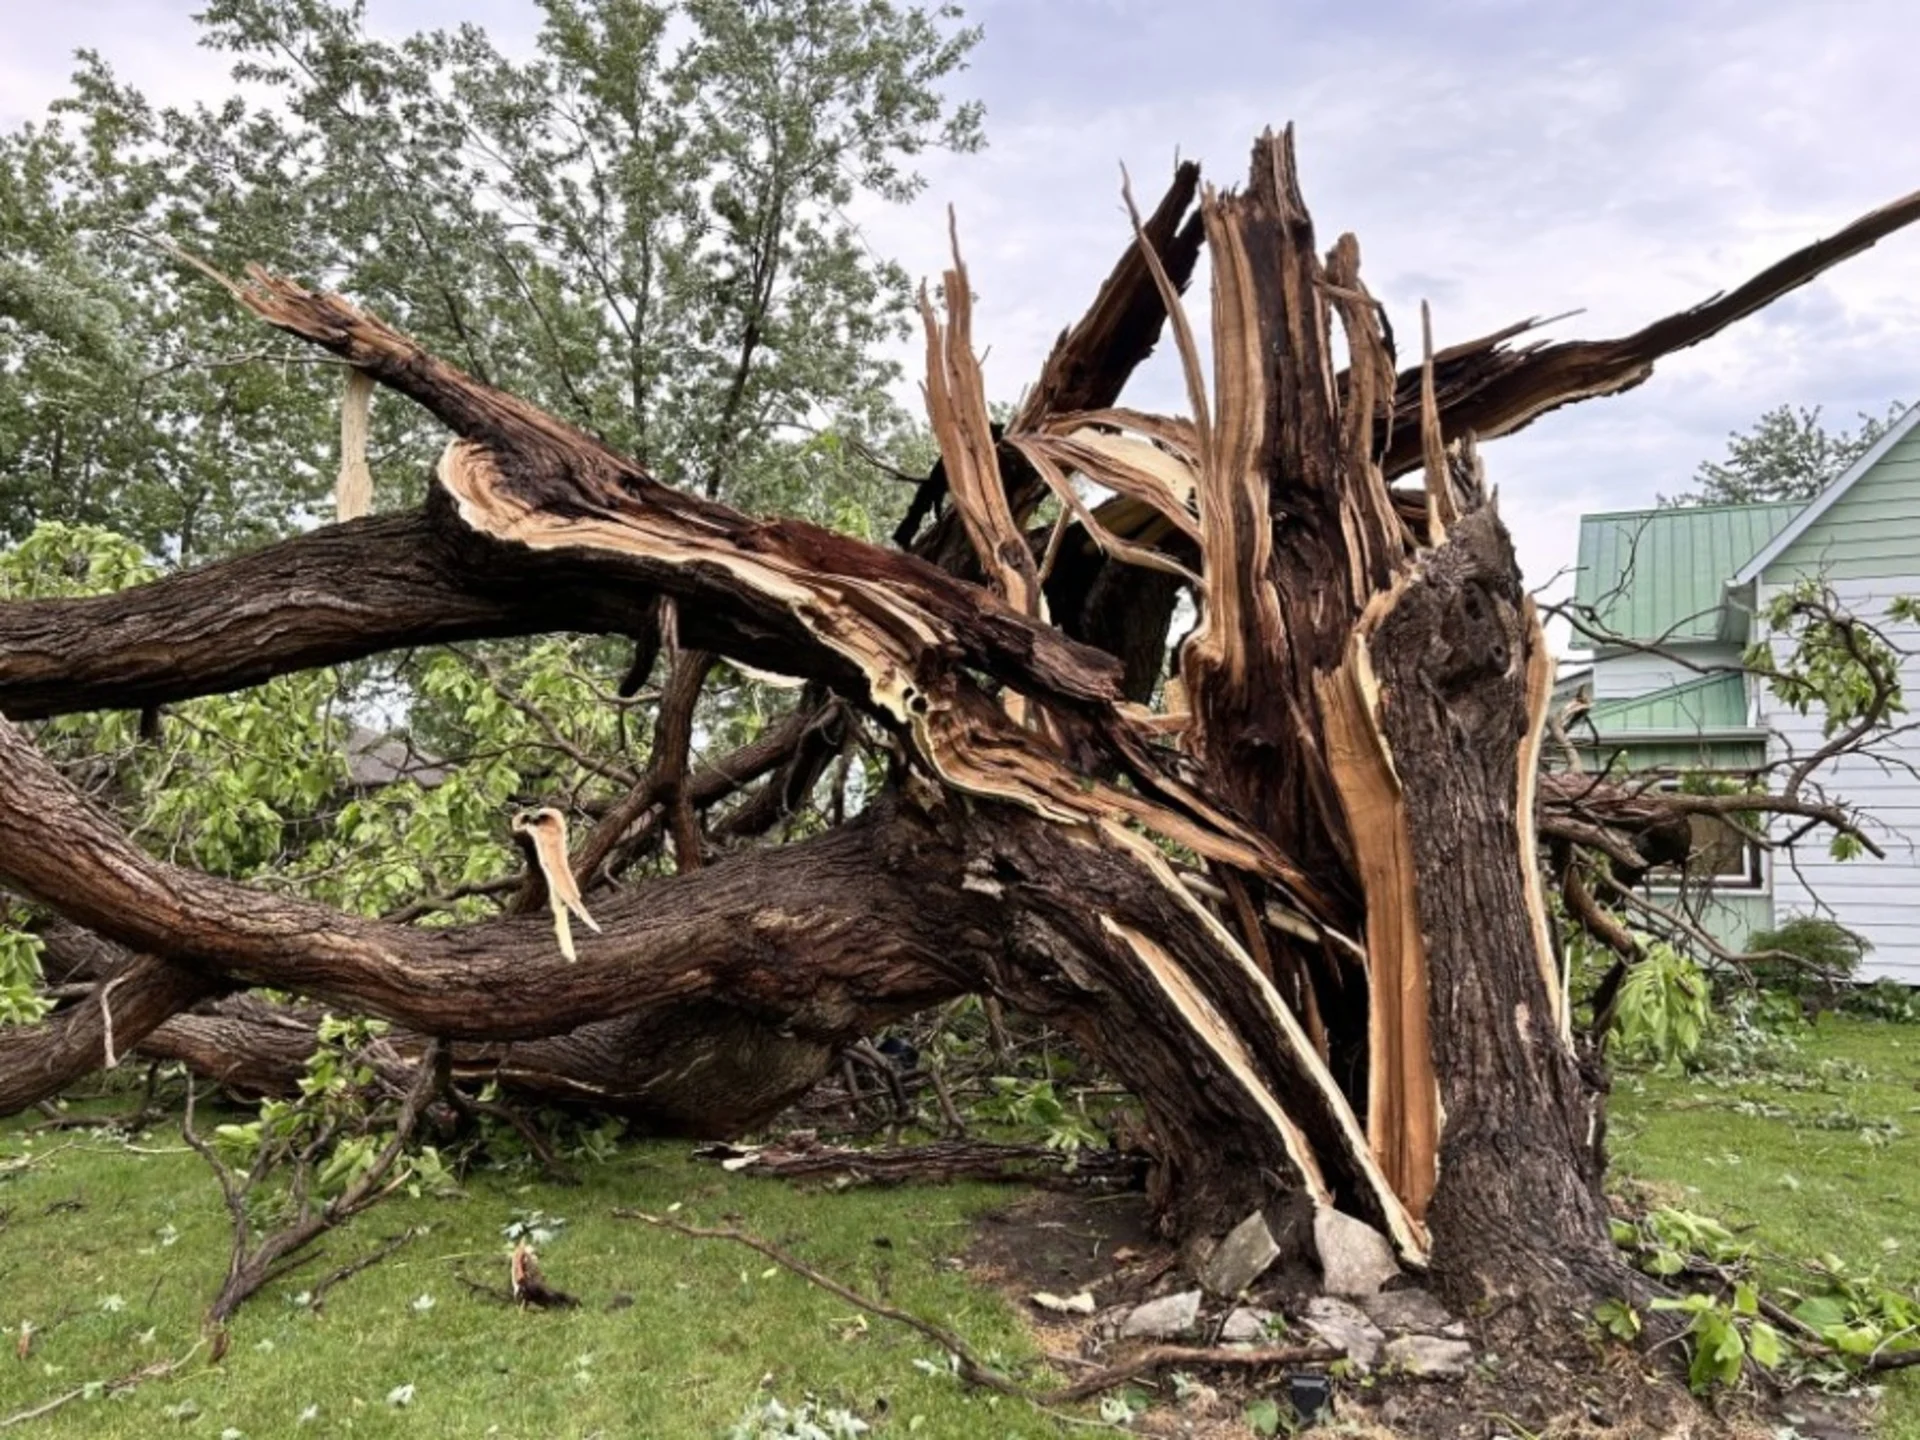 PHOTOS: Damage reported after tornado-warned storms hit southern Ontario